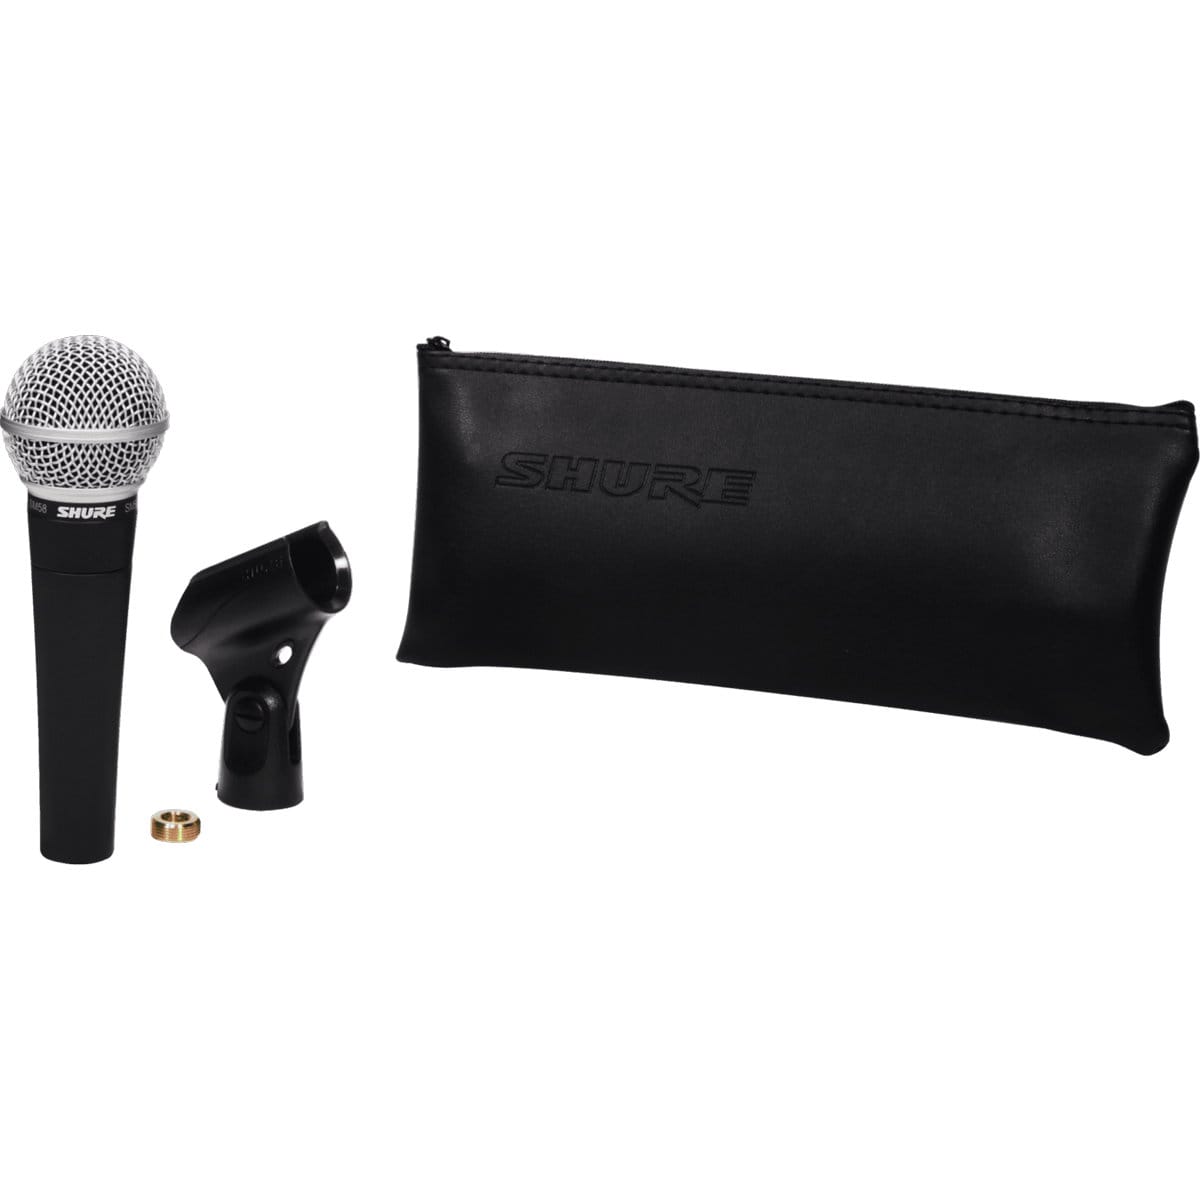 Shure SM58 Dynamic Handheld Microphone with bag and clip